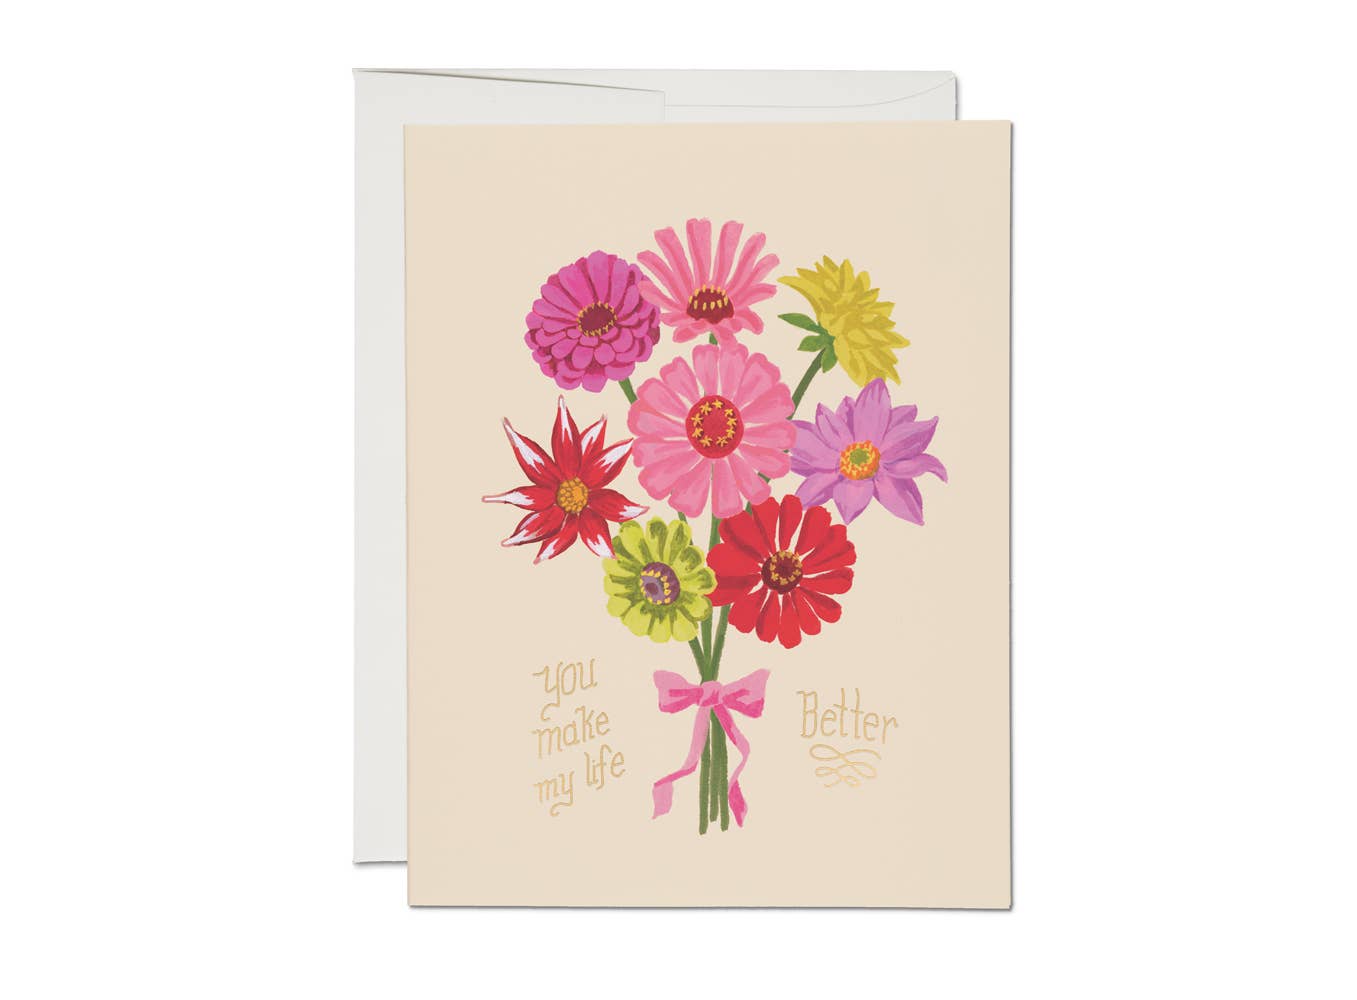 Better Life friendship greeting card